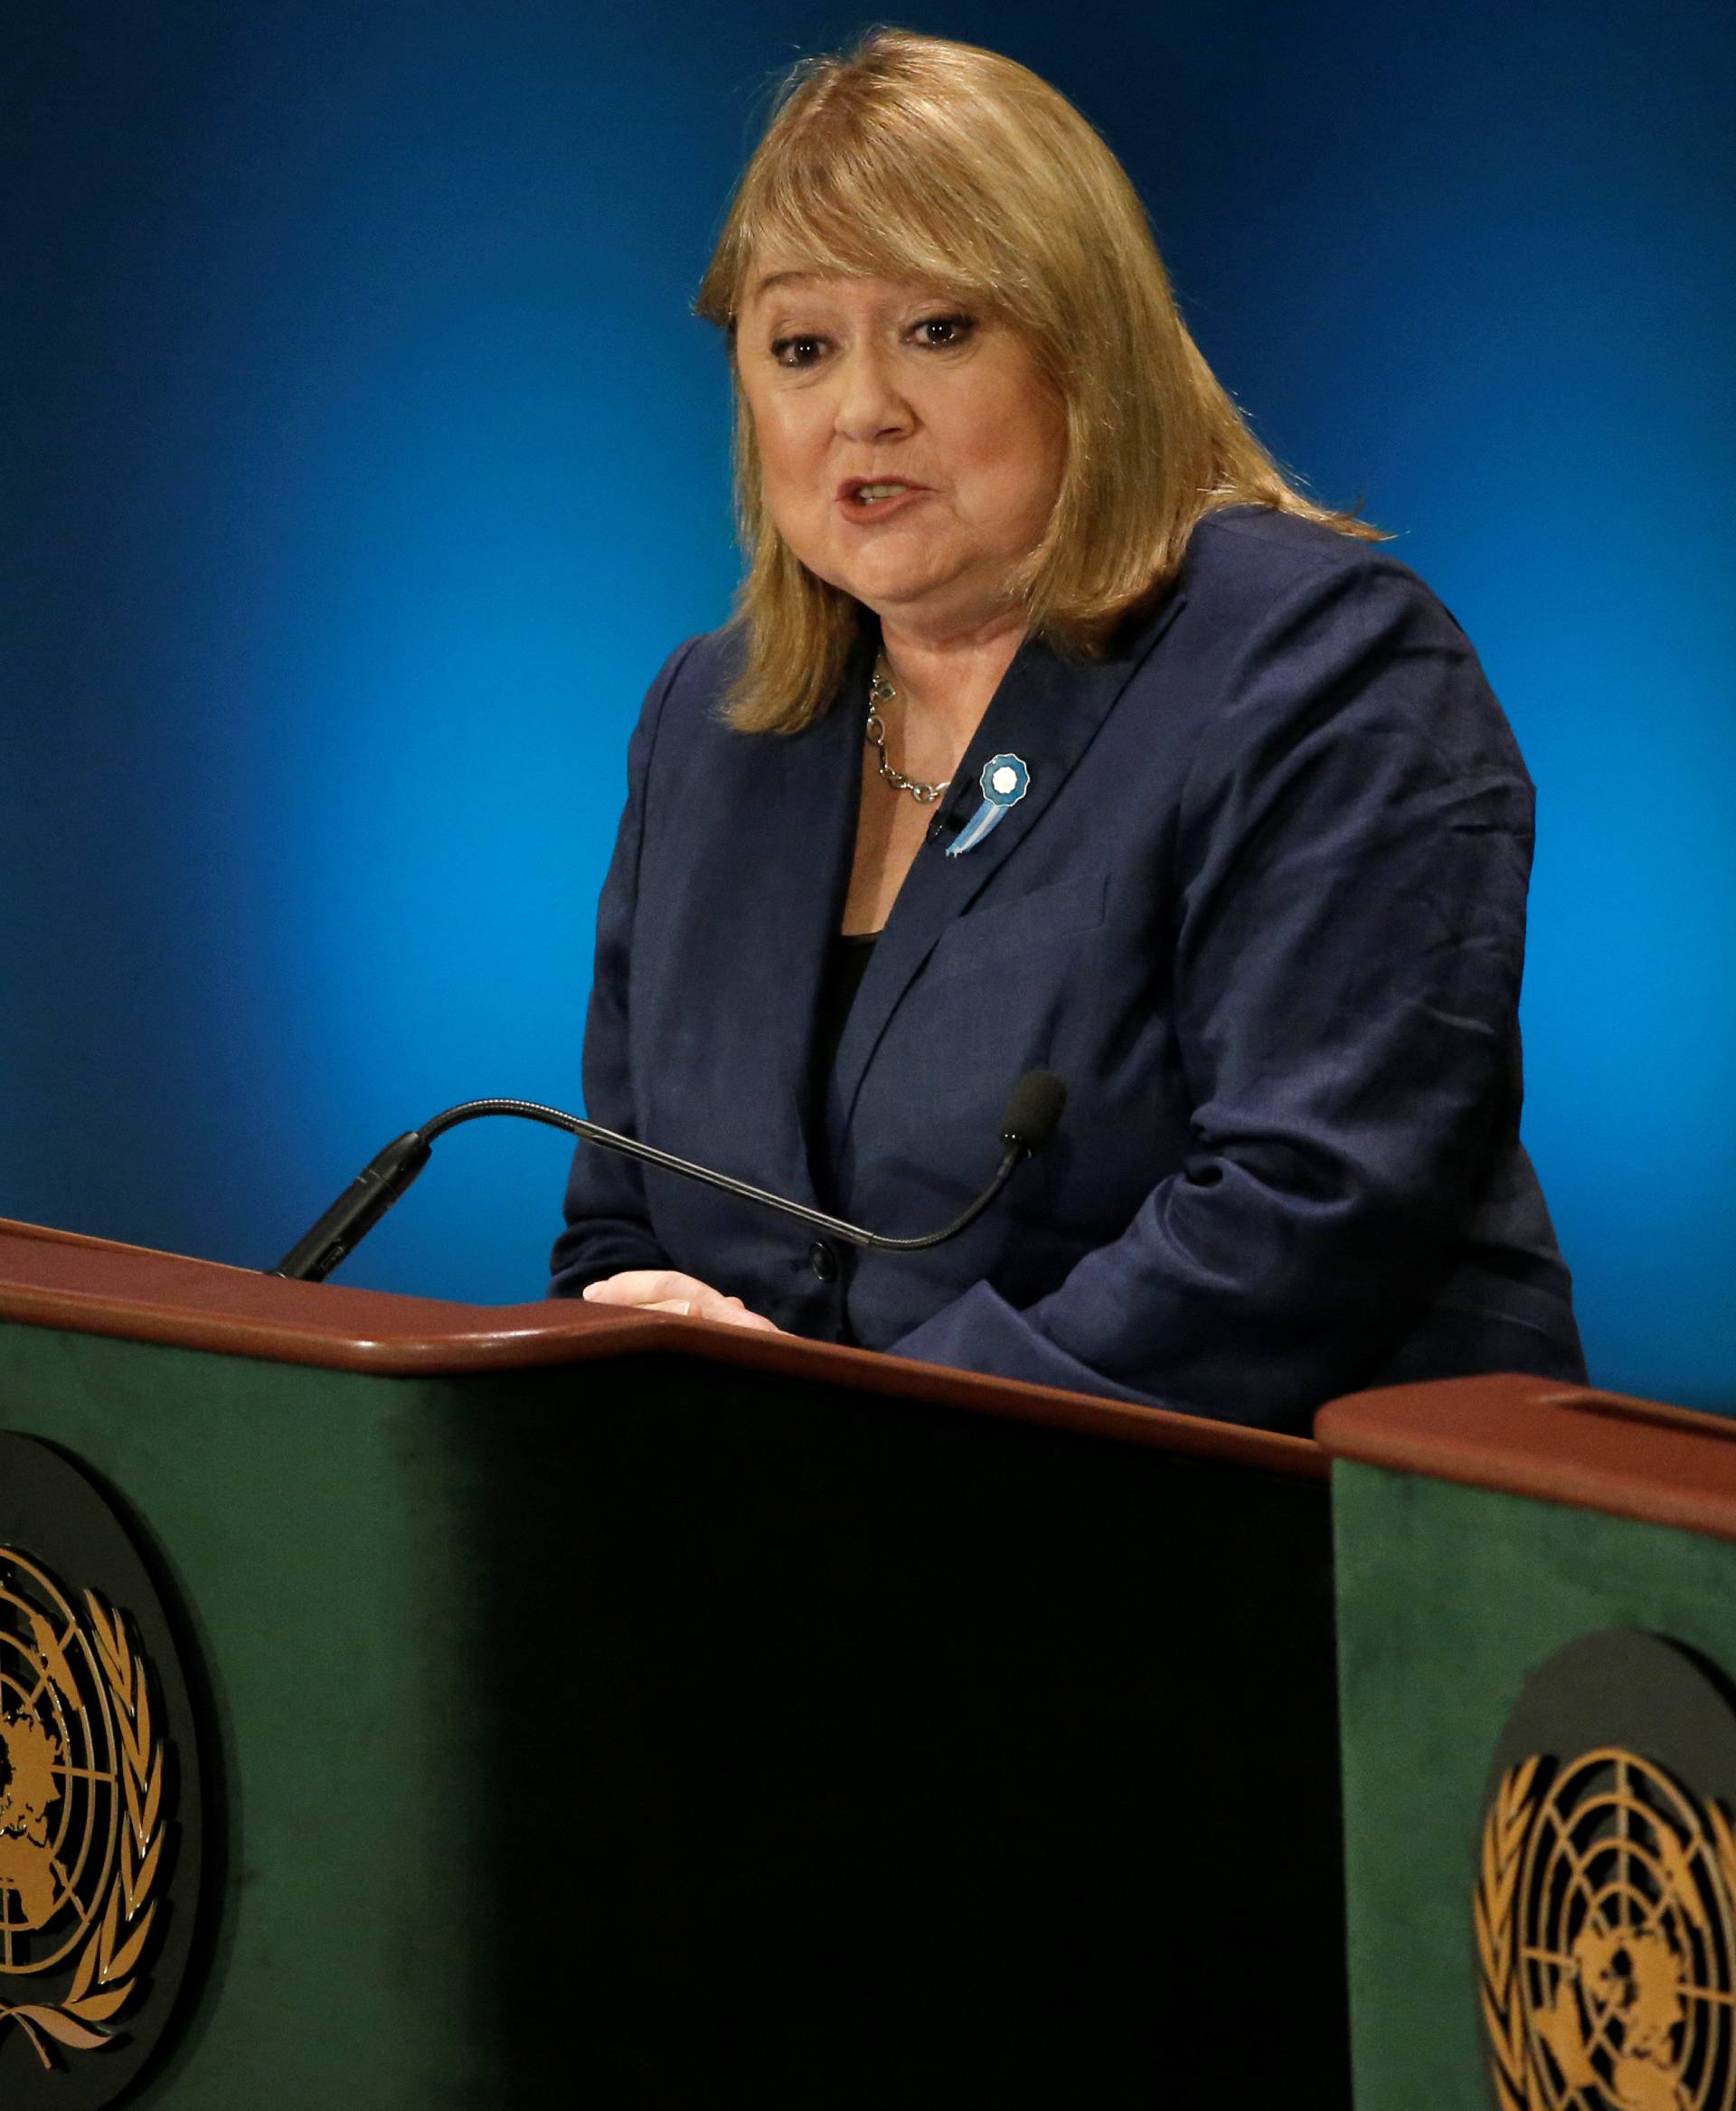 Argentina's Foreign Minister Susana Malcorra speaks during a debate in the United Nations General Assembly between candidates vying to be the next U.N. Secretary General at U.N. headquarters in New York